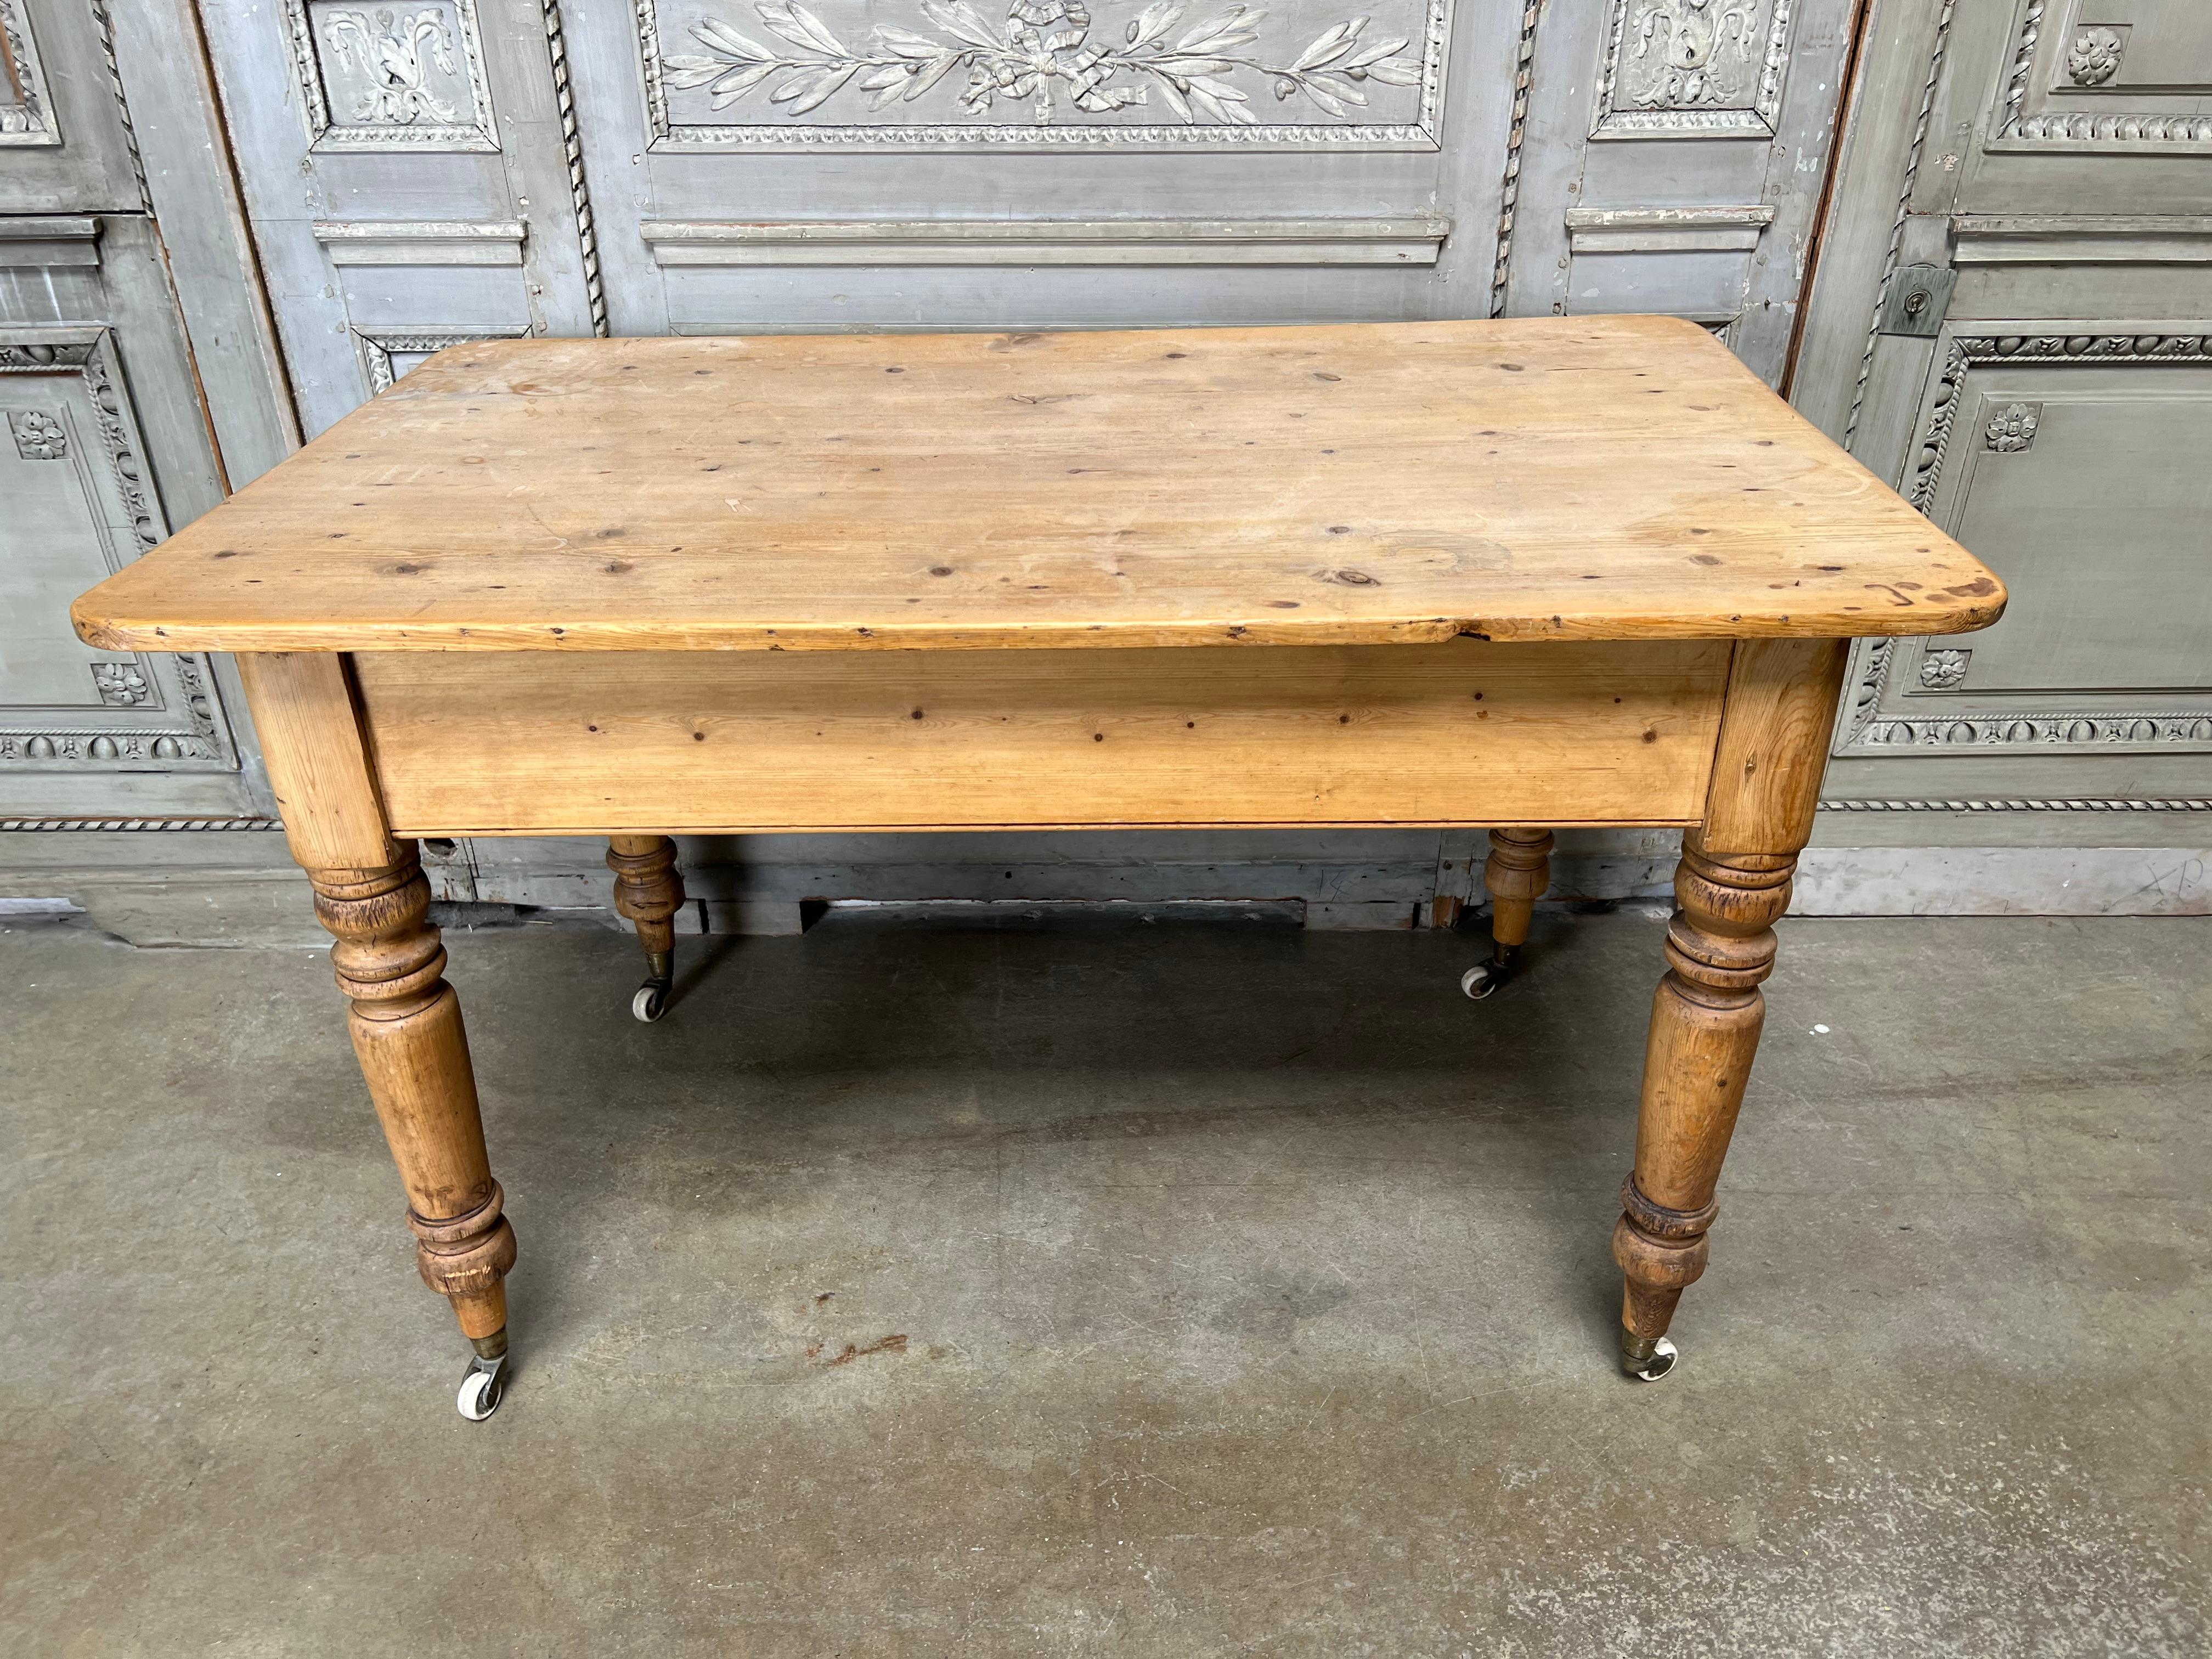 An English Victorian pine kitchen farm table. This table has a drawer at one end and is on brass and porcelain casters. It is an ideal kitchen island and breakfast table.